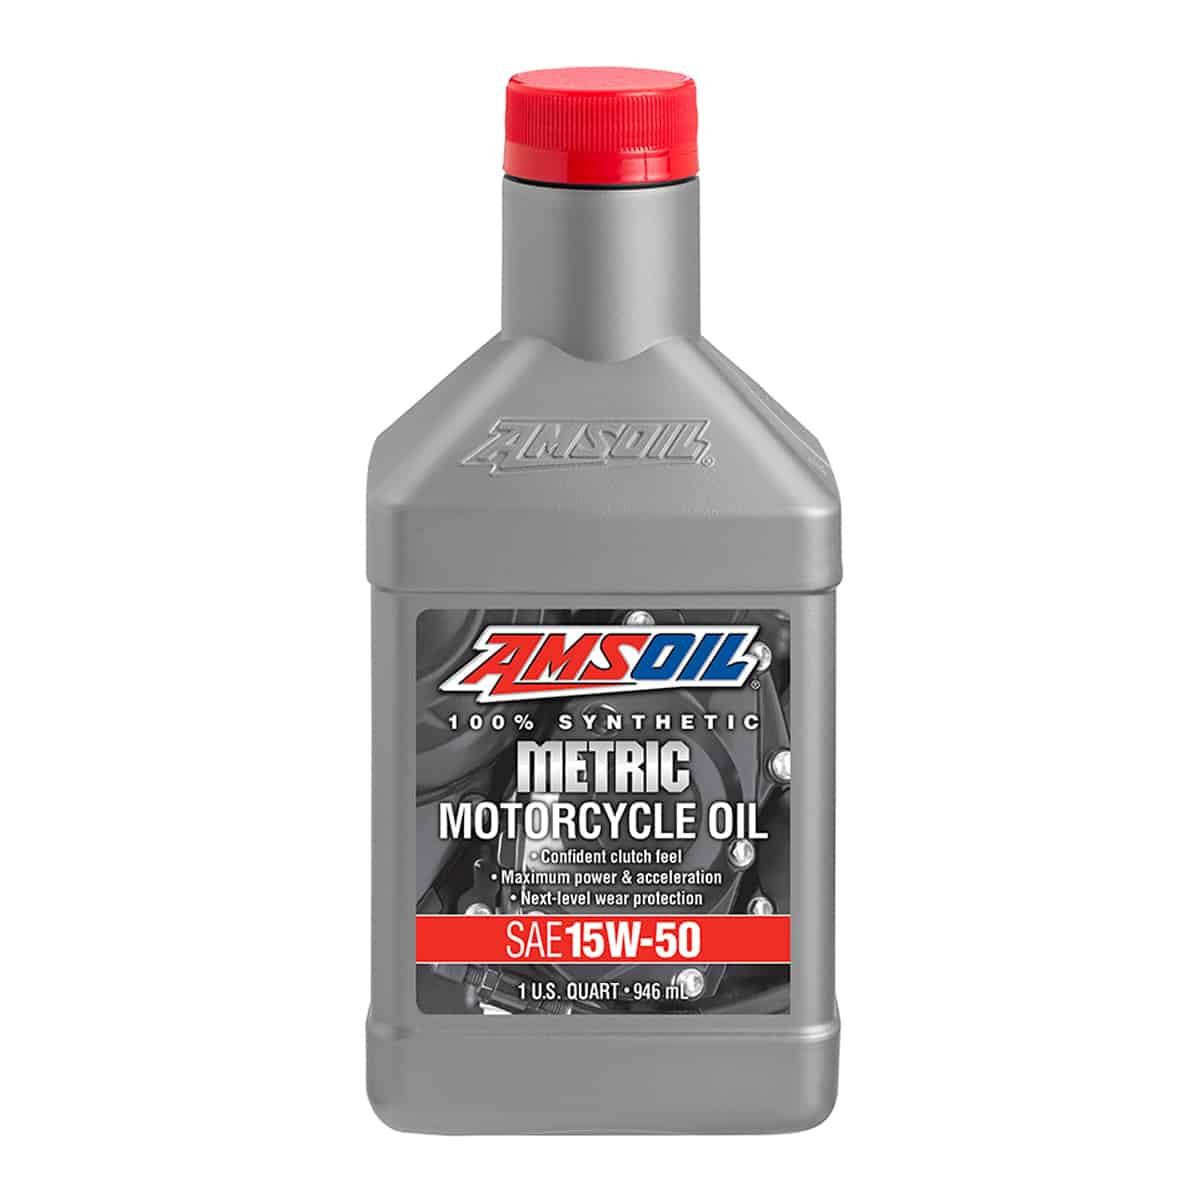 A bottle of AMSOIL Synthetic Metric Motorcycle Oil, designed for metric bike owners who demand the absolute best lubrication for their motorcycles.